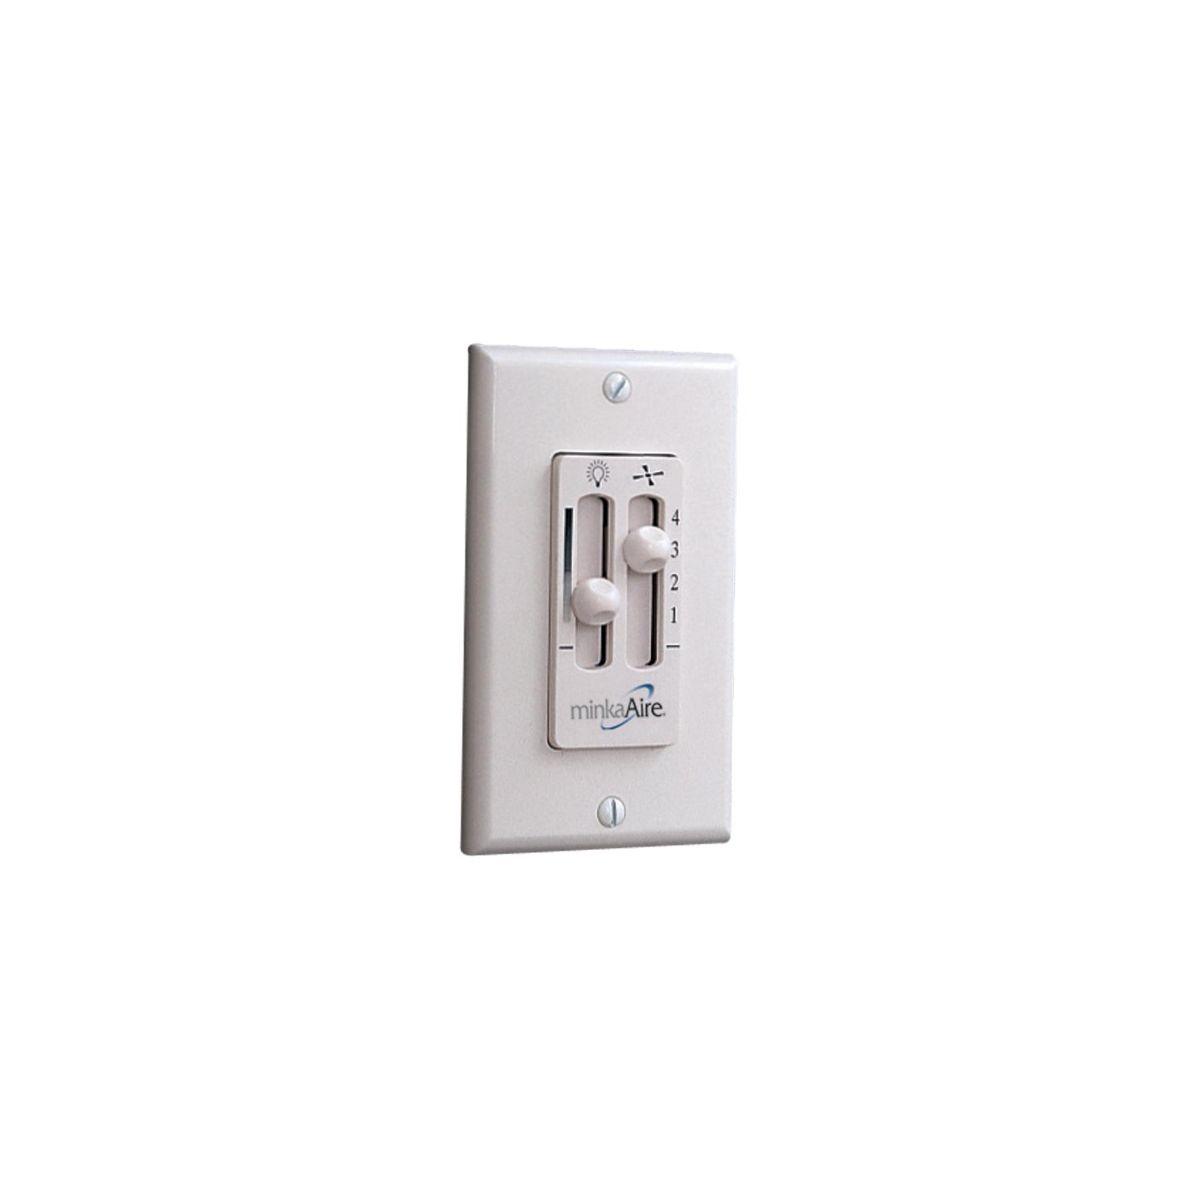 4-Speed Ceiling Fan Ant Light Wall Control, White Finish